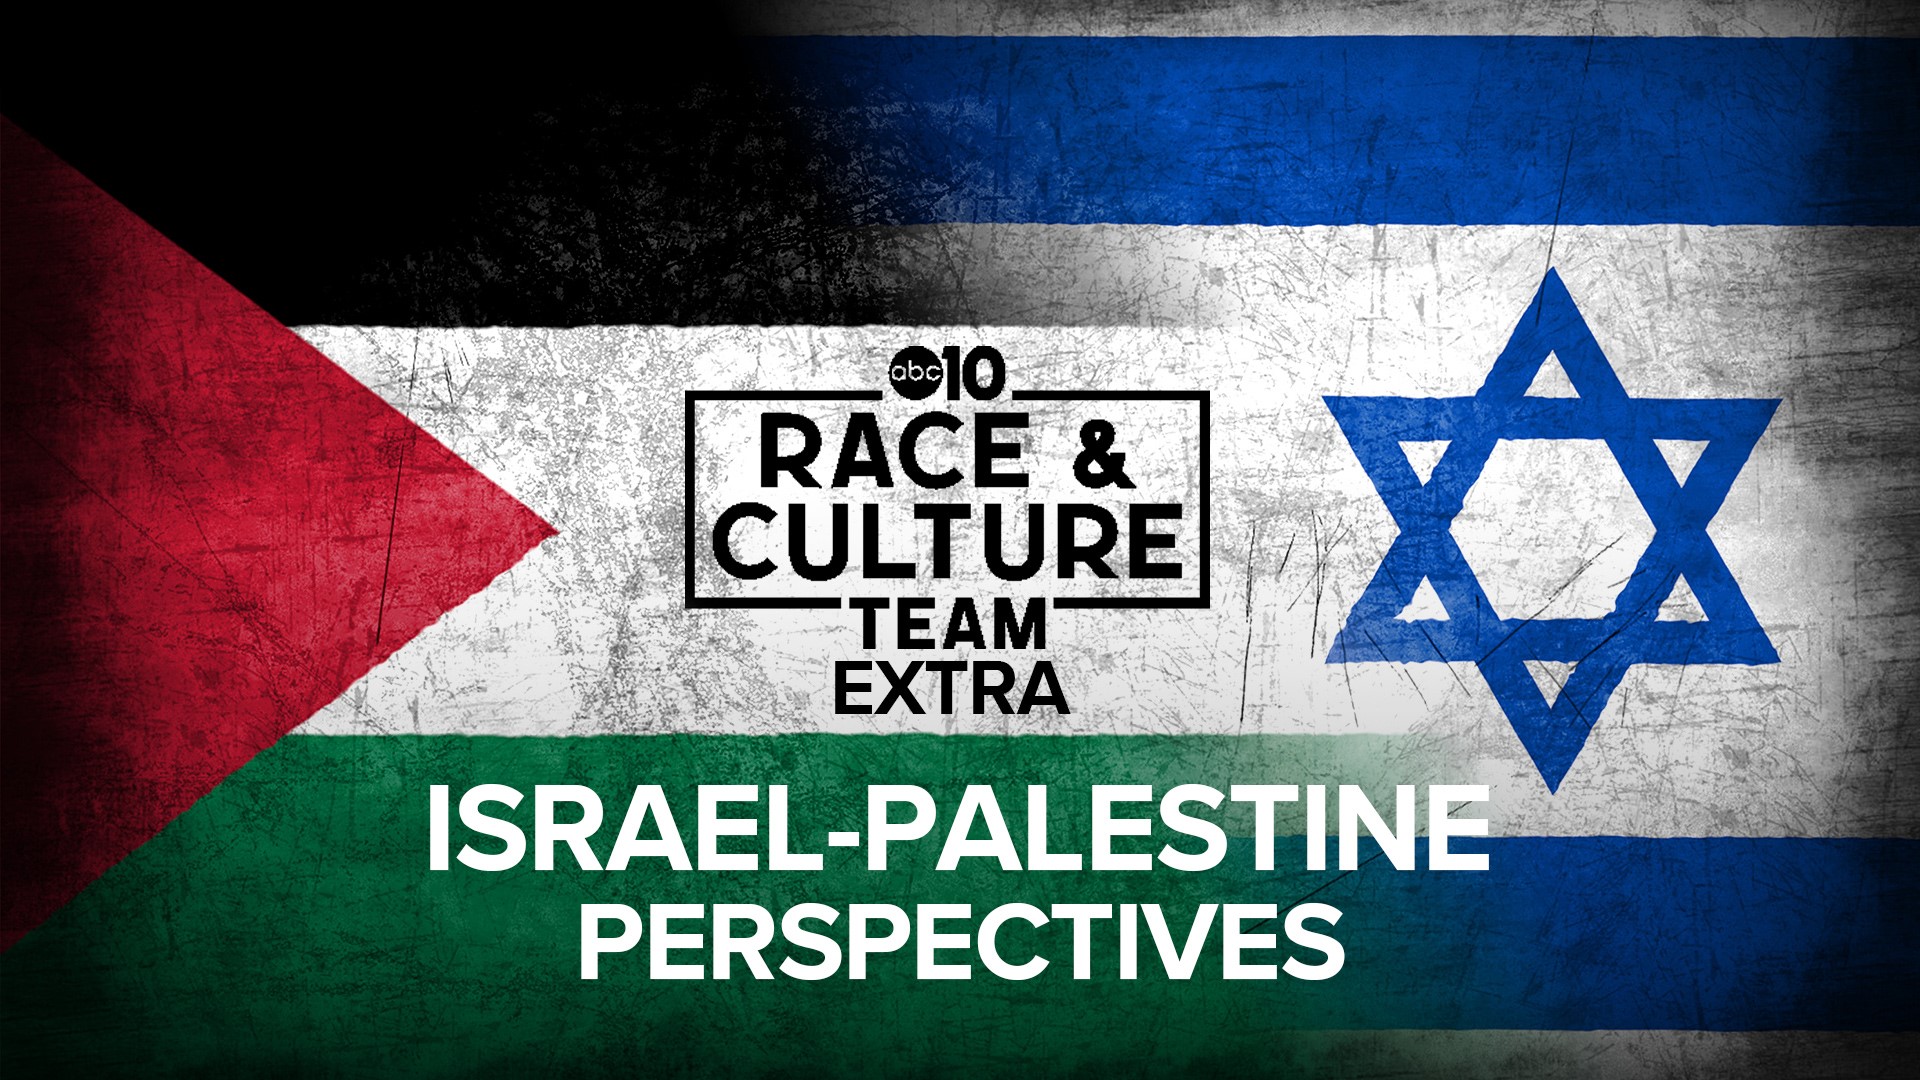 Three community leaders share their personal experience and perspectives of the Israel and Palestine conflict.